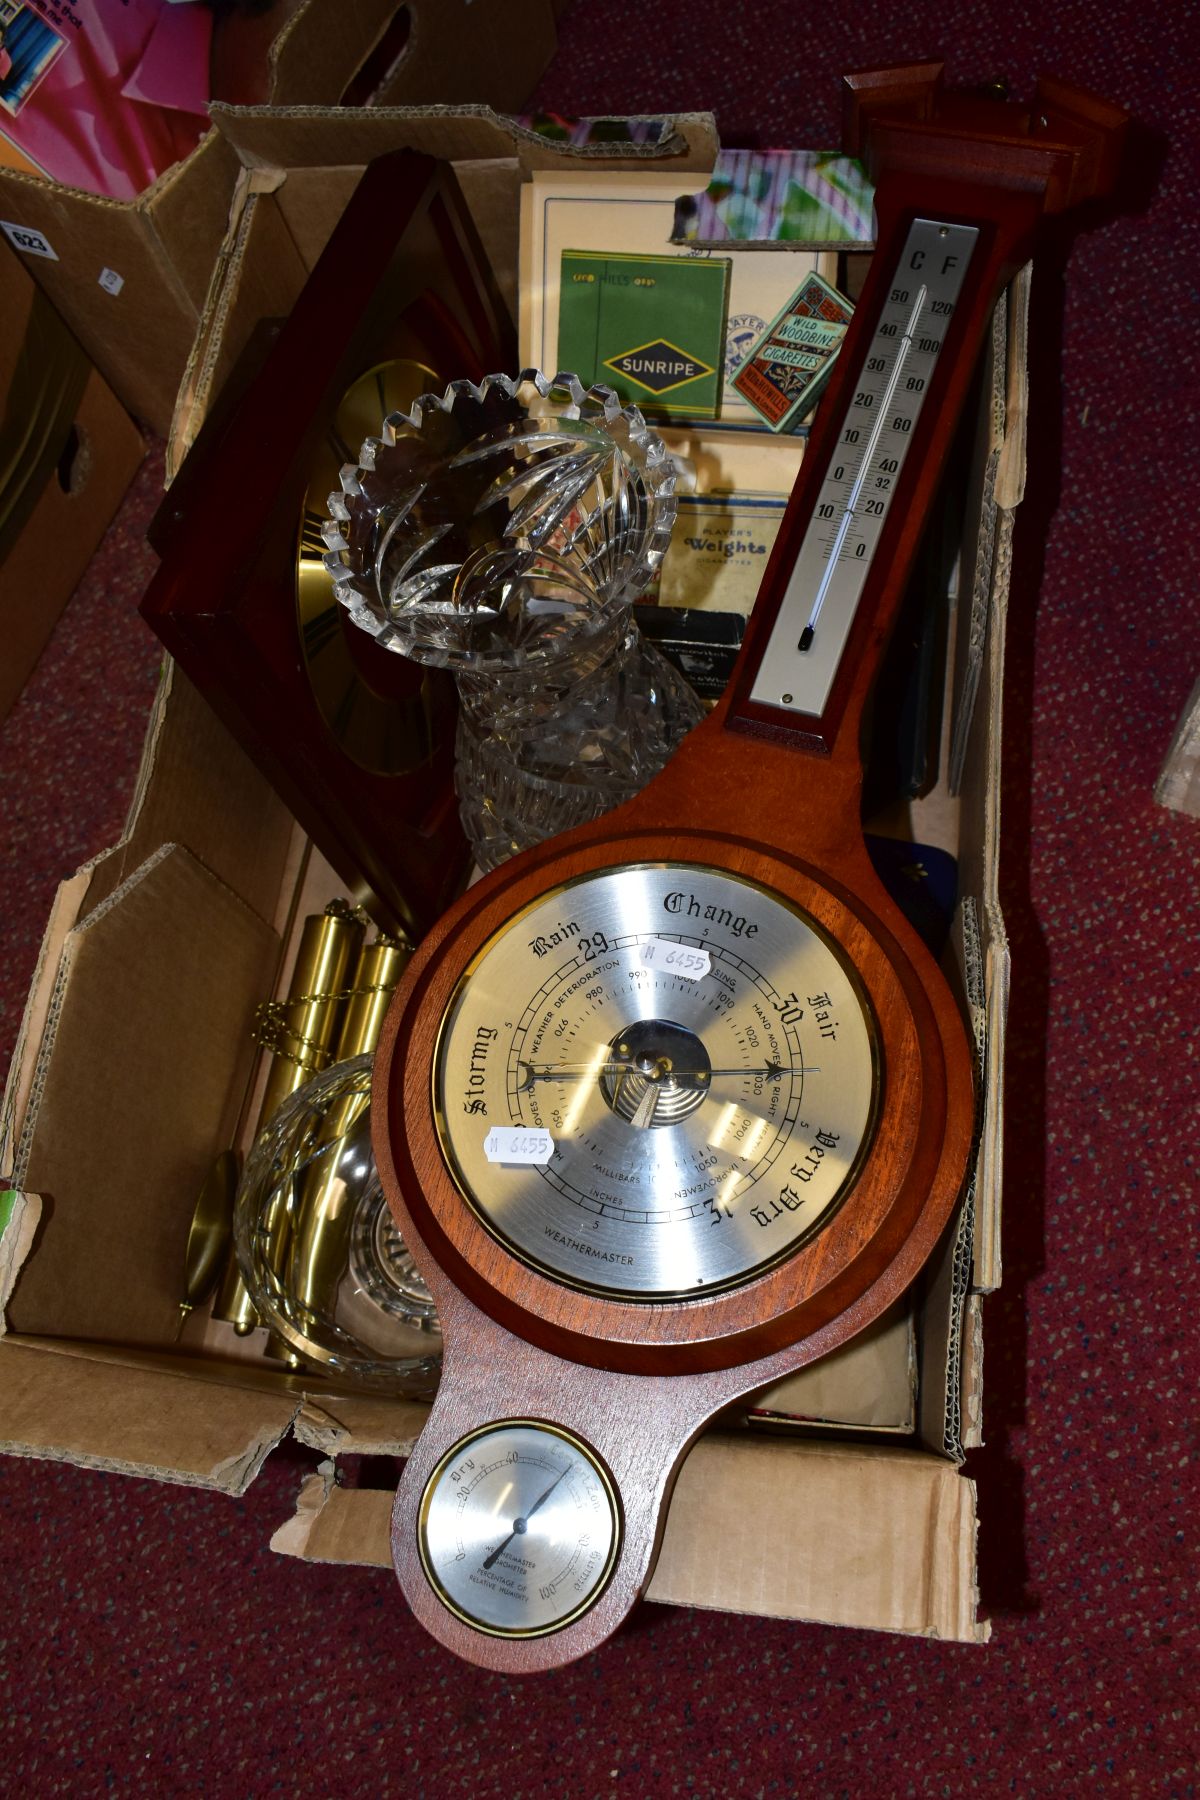 A BOX OF GLASSWARES, CIGARETTE CARDS, VINTAGE CIGARETTE PACKETS, A WALL CLOCK, A BAROMETER AND - Image 2 of 6